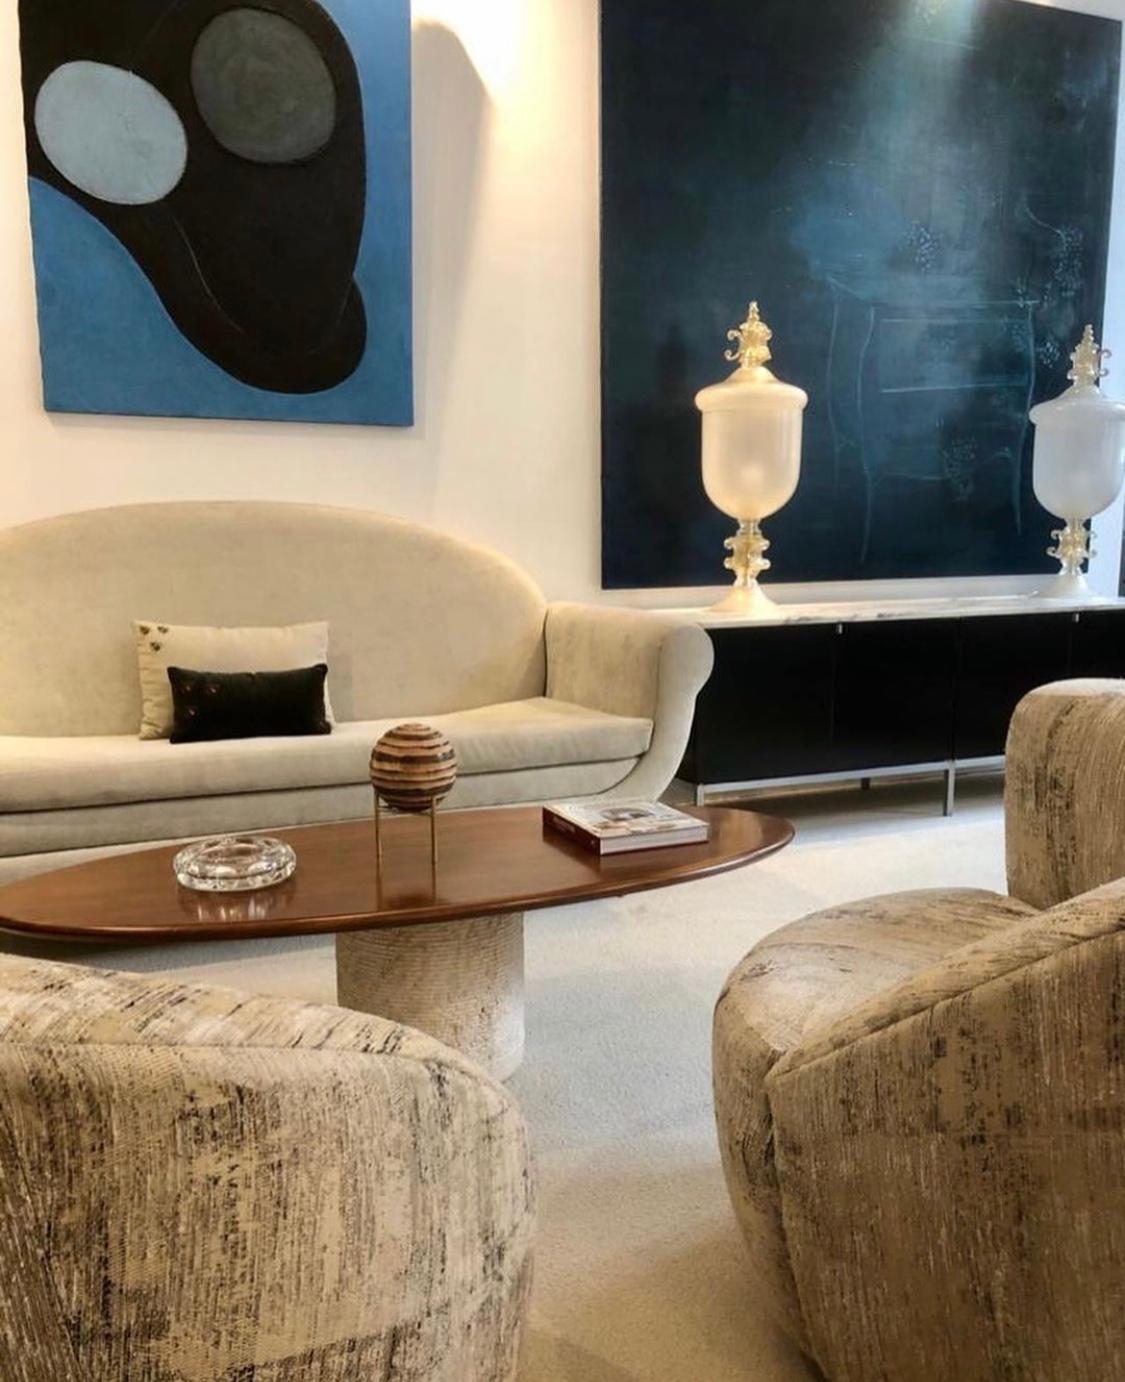 Like a surfboard this atomic tabletop handcrafted and made of polished wood, with a travertine central circular leg is extremely elegant. This exceptional piece is hand signed by Giullio Lazzotti itself.
Giulio Lazzotti is an Italian Designer, he